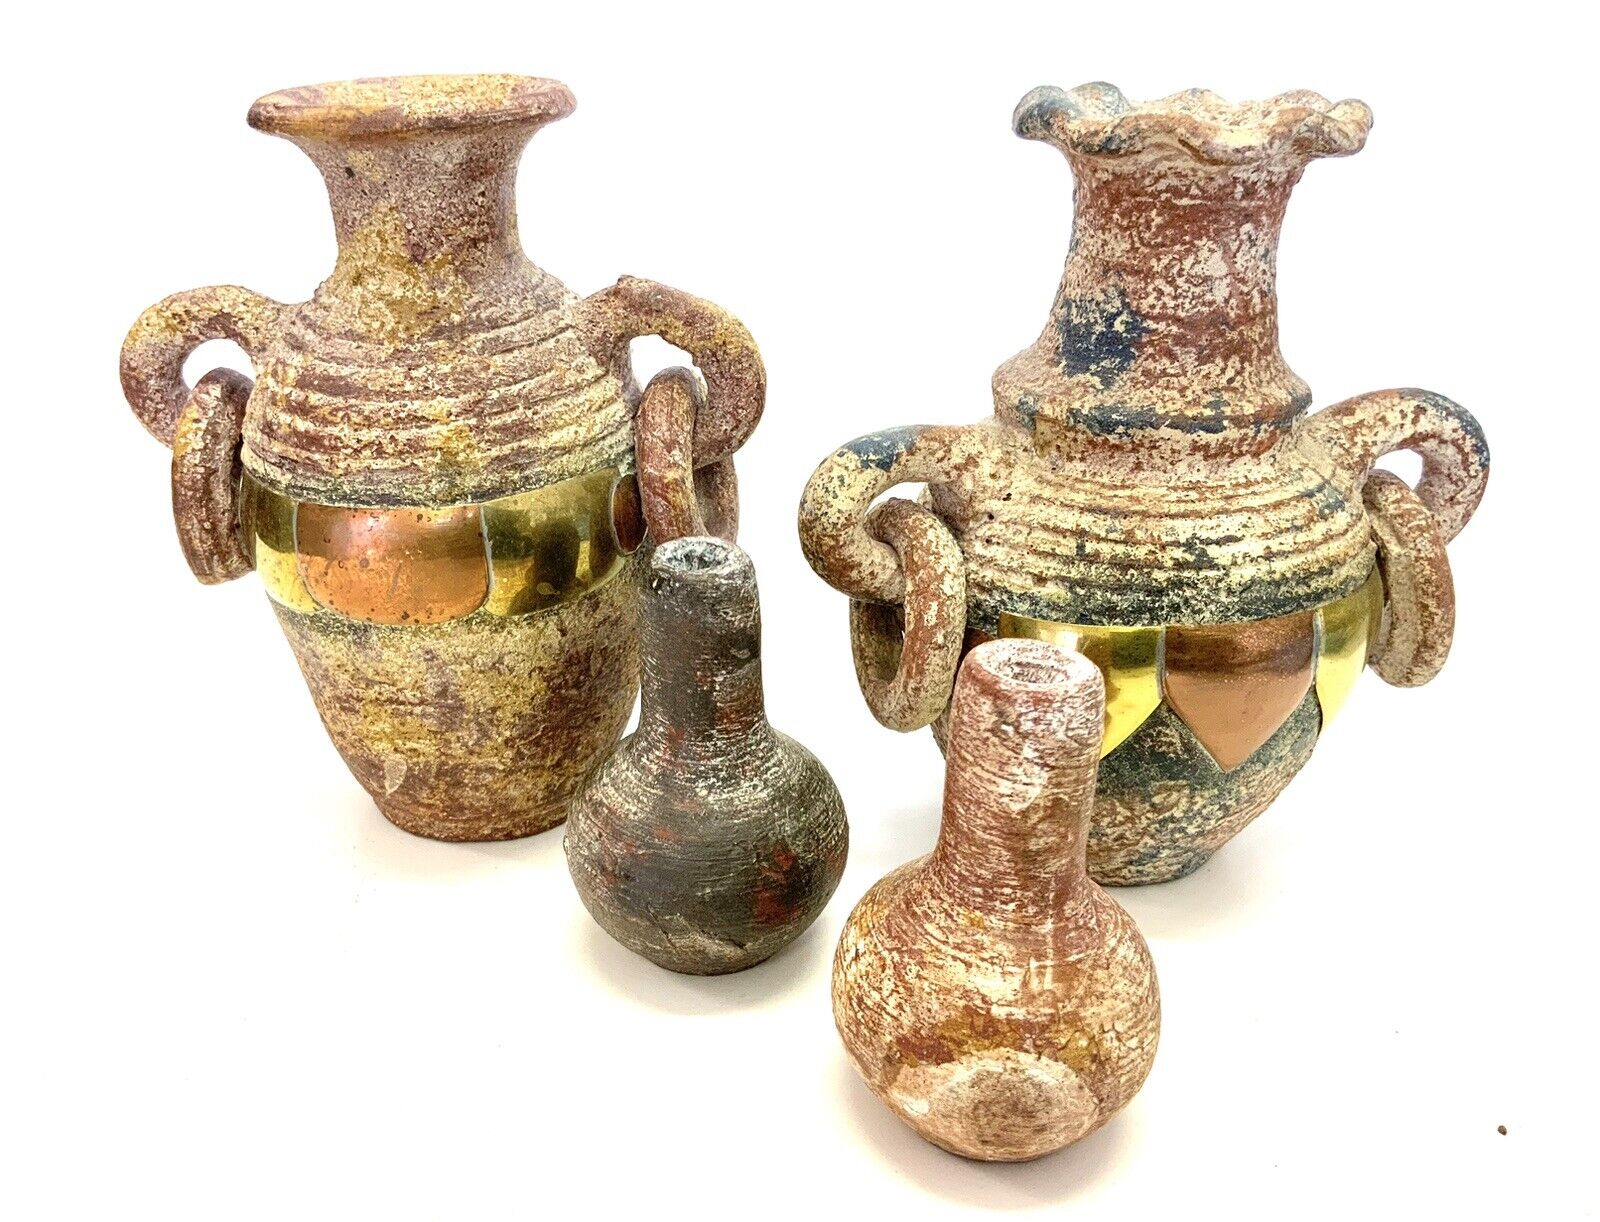 4 Piece Vintage Mexican Pottery Chimneas Candleholder Vase Copper Brass Accents